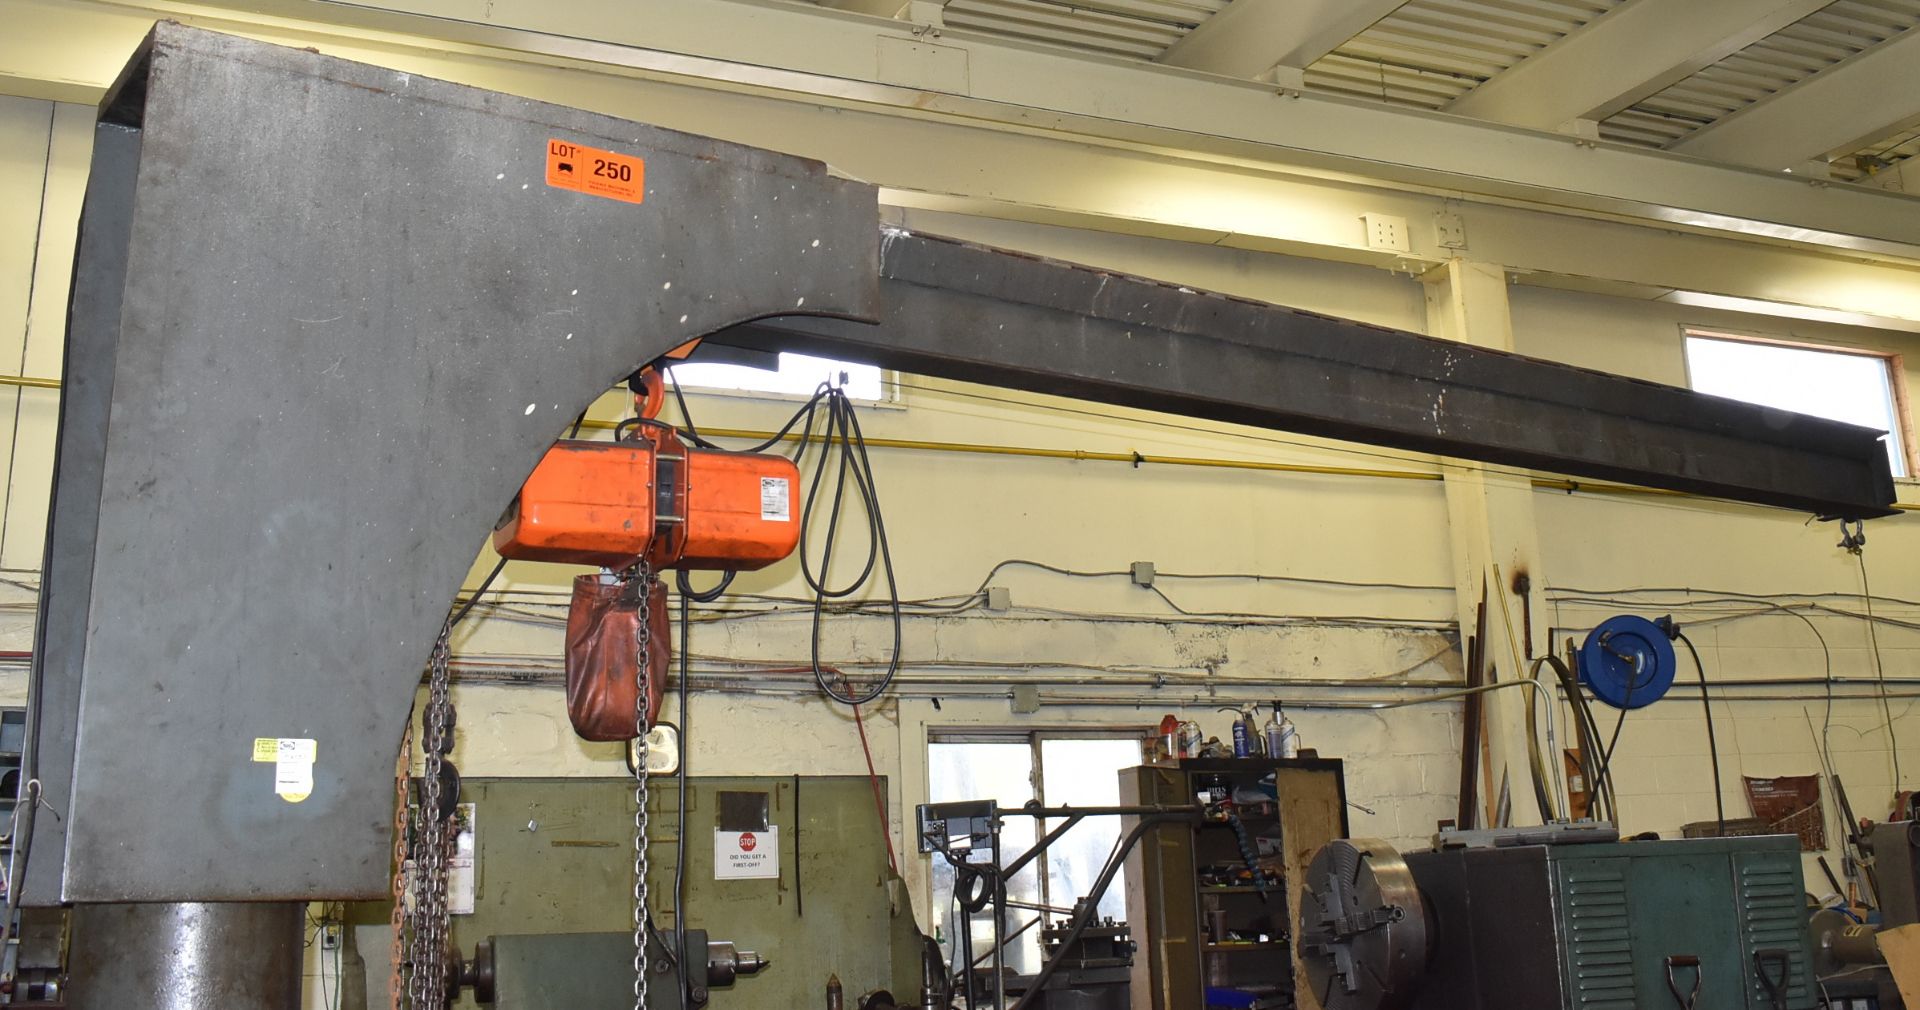 MFG. UNKNOWN FREE STANDING JIB ARM WITH NICH 500 KG (1/2 TON) CAPACITY ELECTRIC HOIST, MANUAL